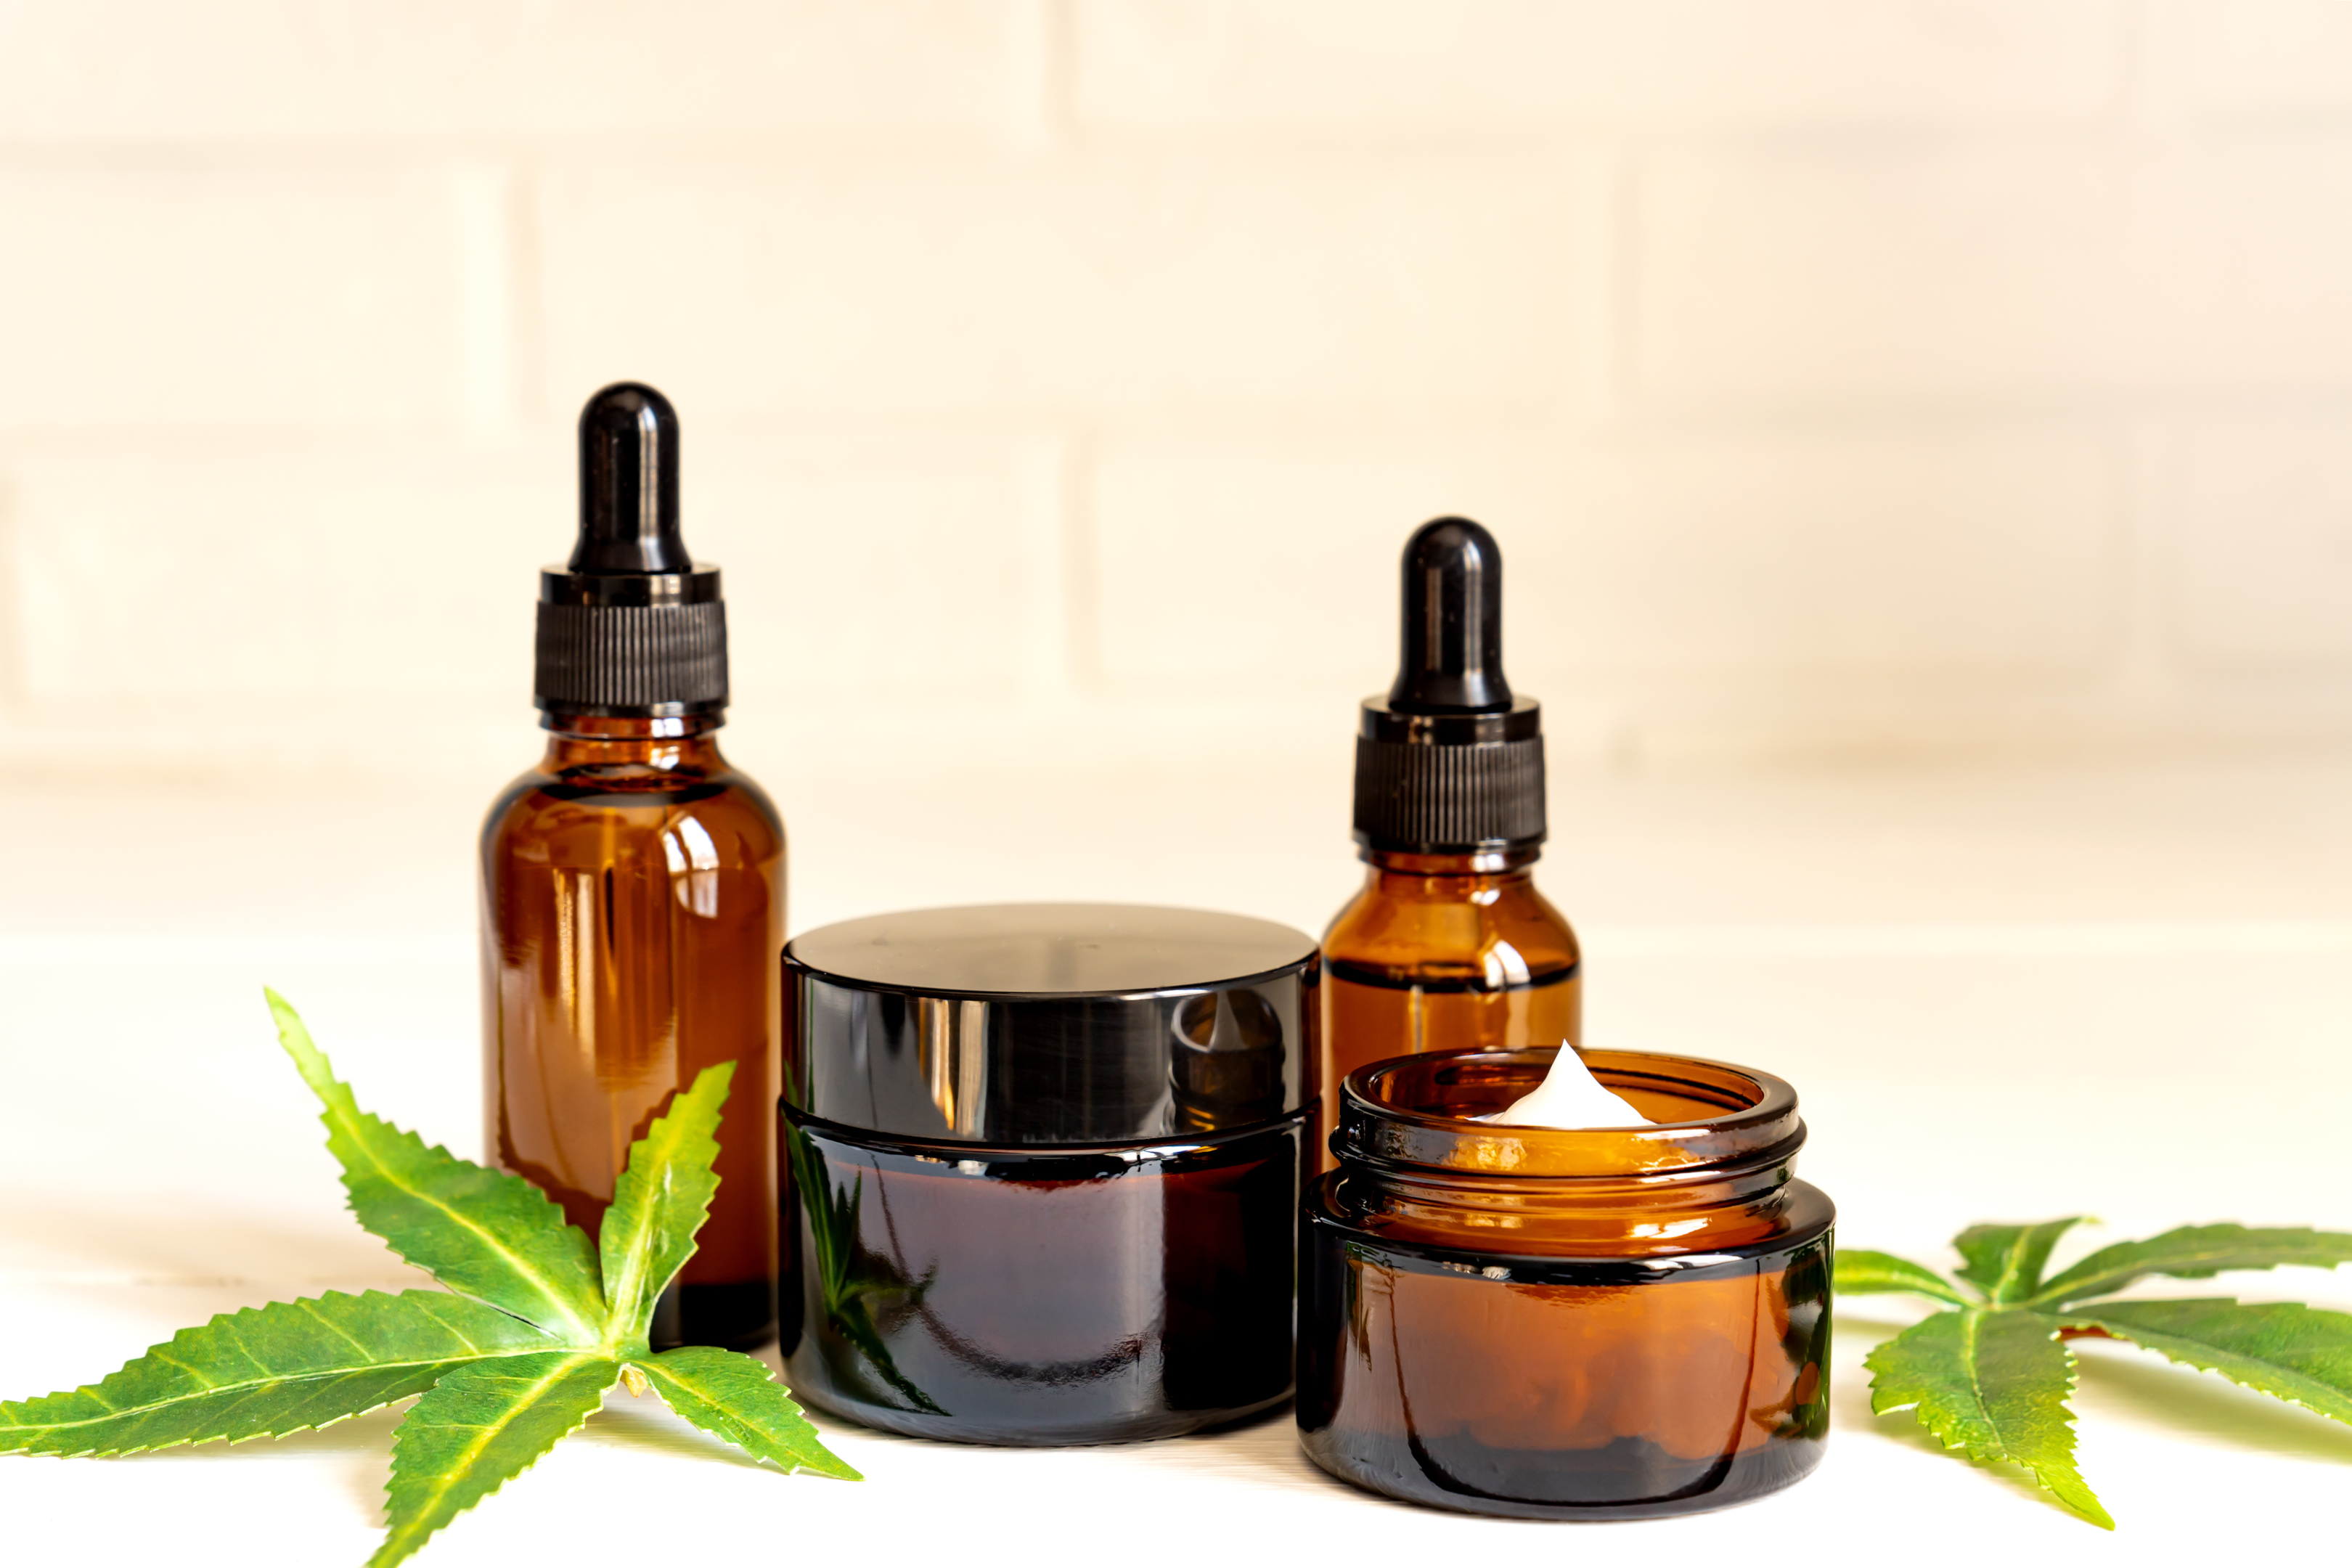 CBD has a lot of potential and this industry is still in its infancy. CBD tinctures and derivatives from these other plants like cannabis have opened the door to potential research and wellness aids for enhanced workout performance and recovery.